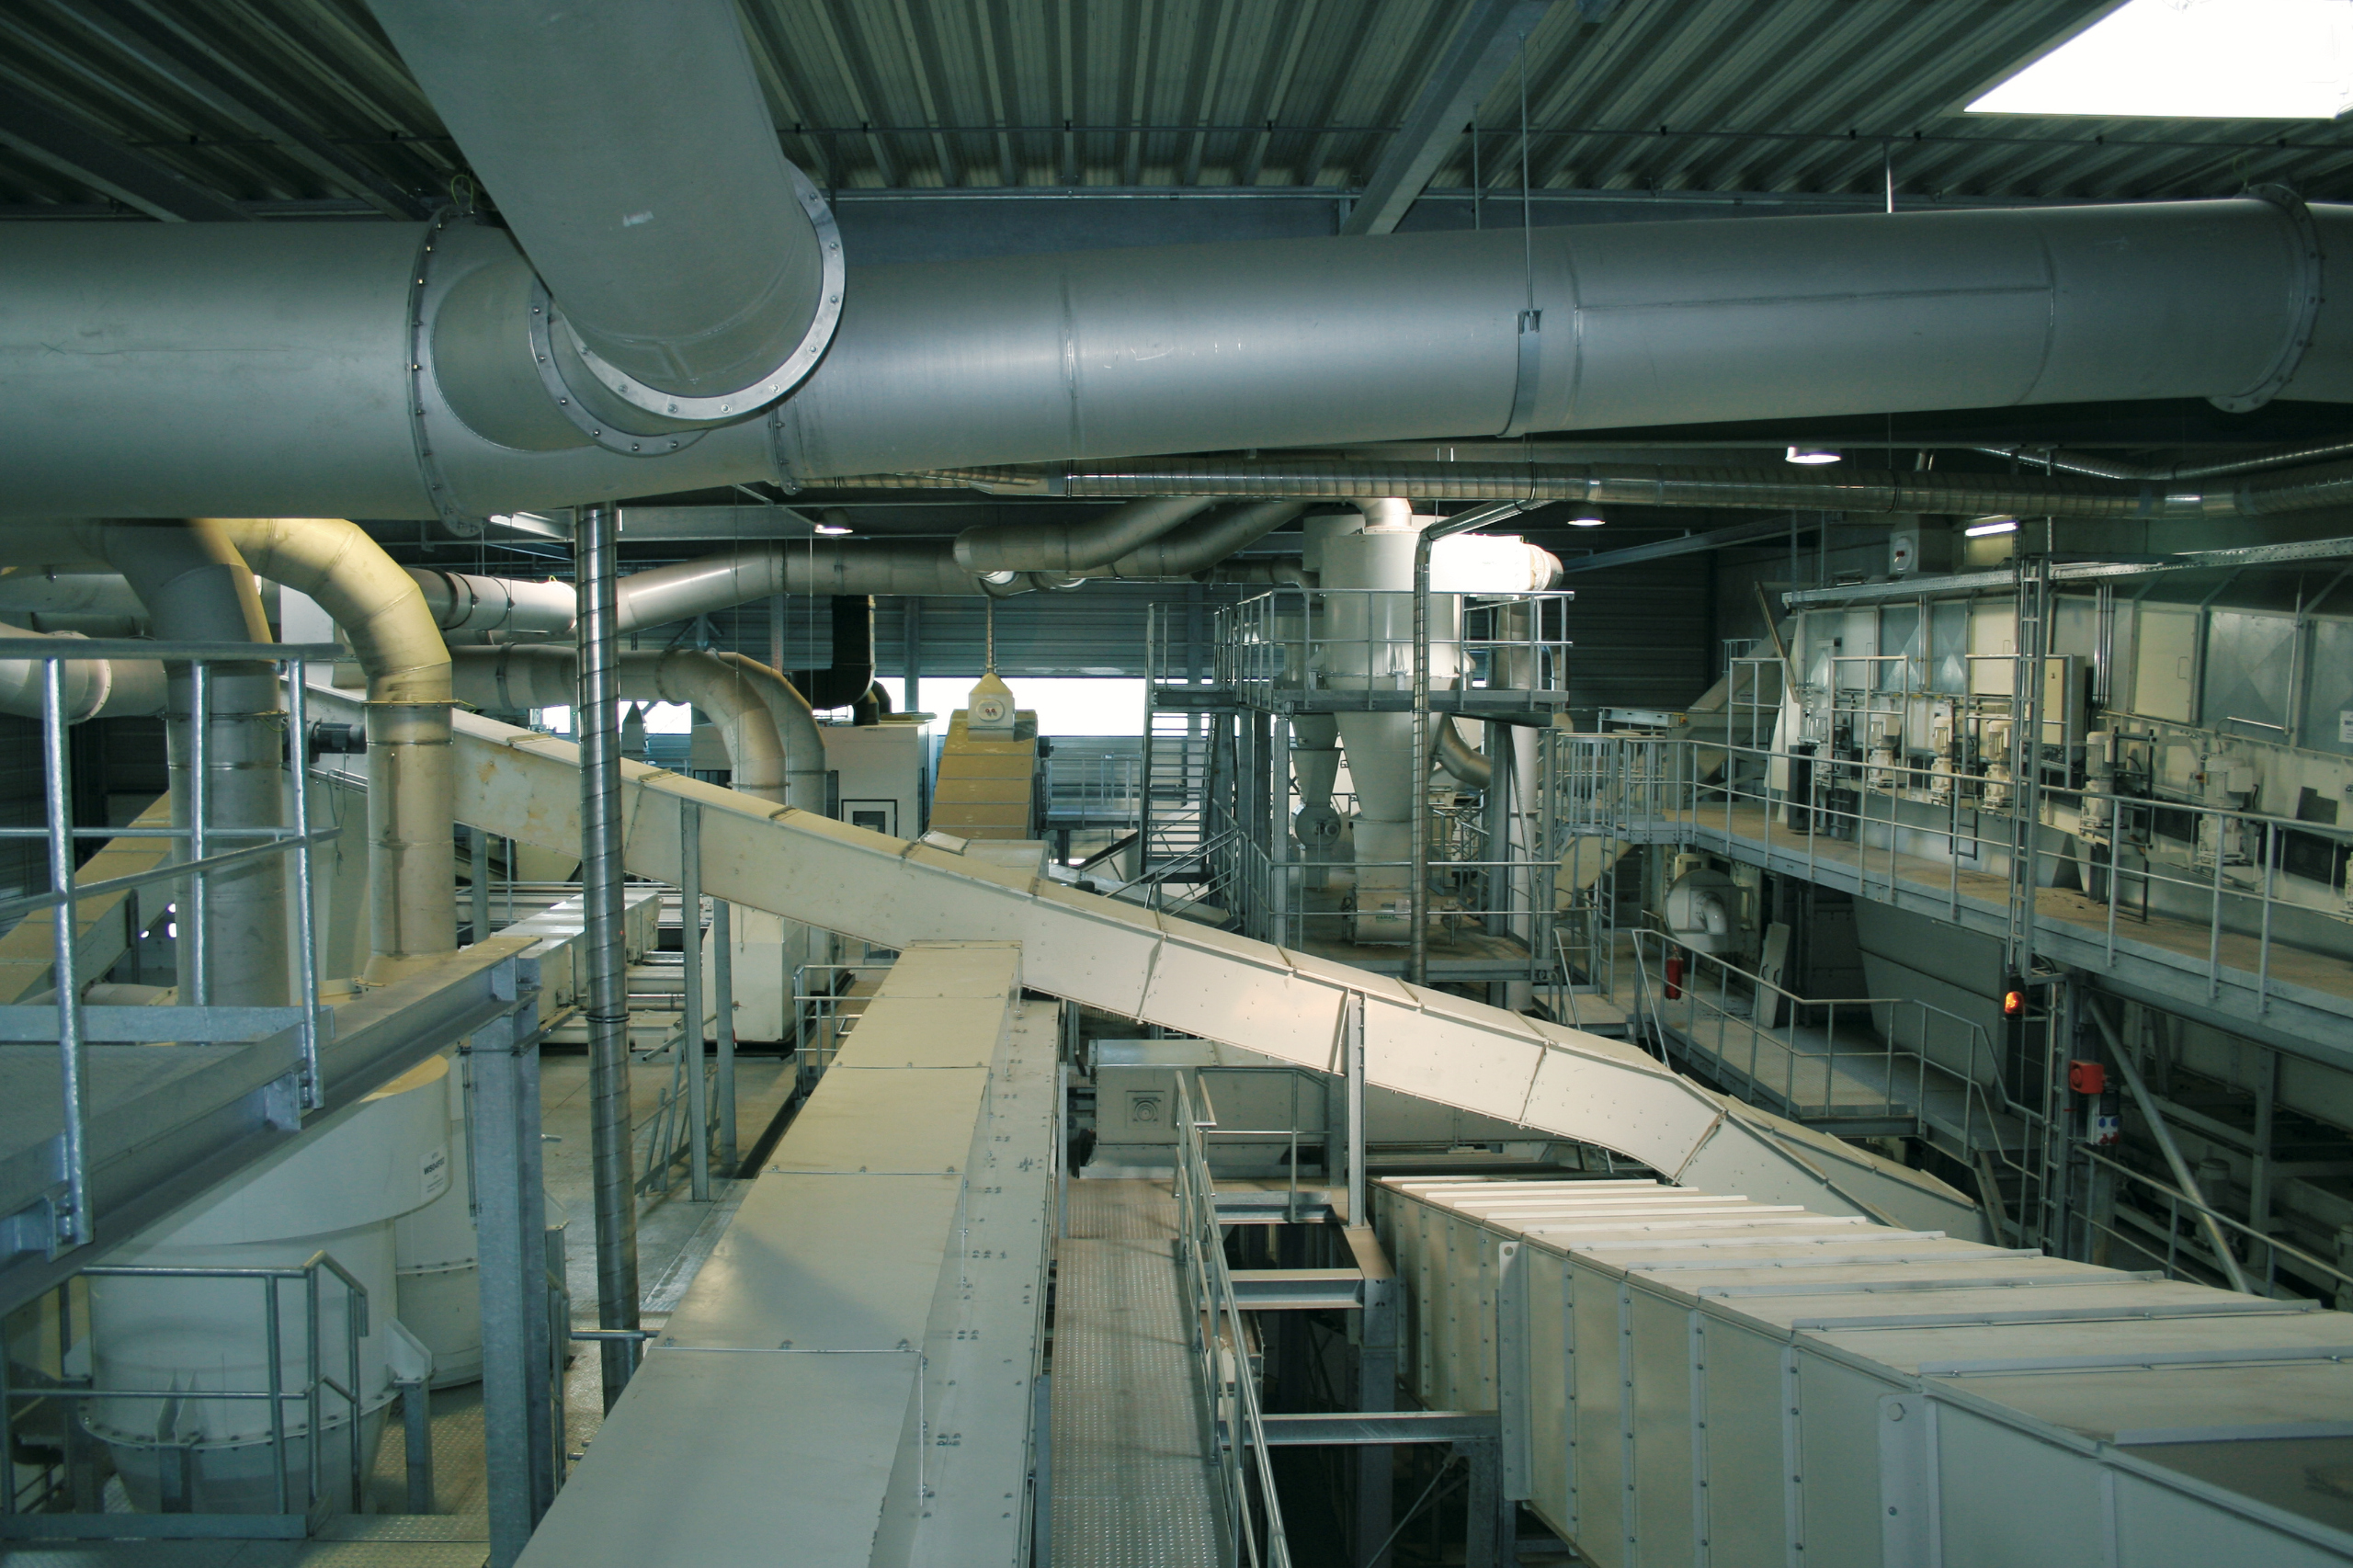 Interior view of the plant